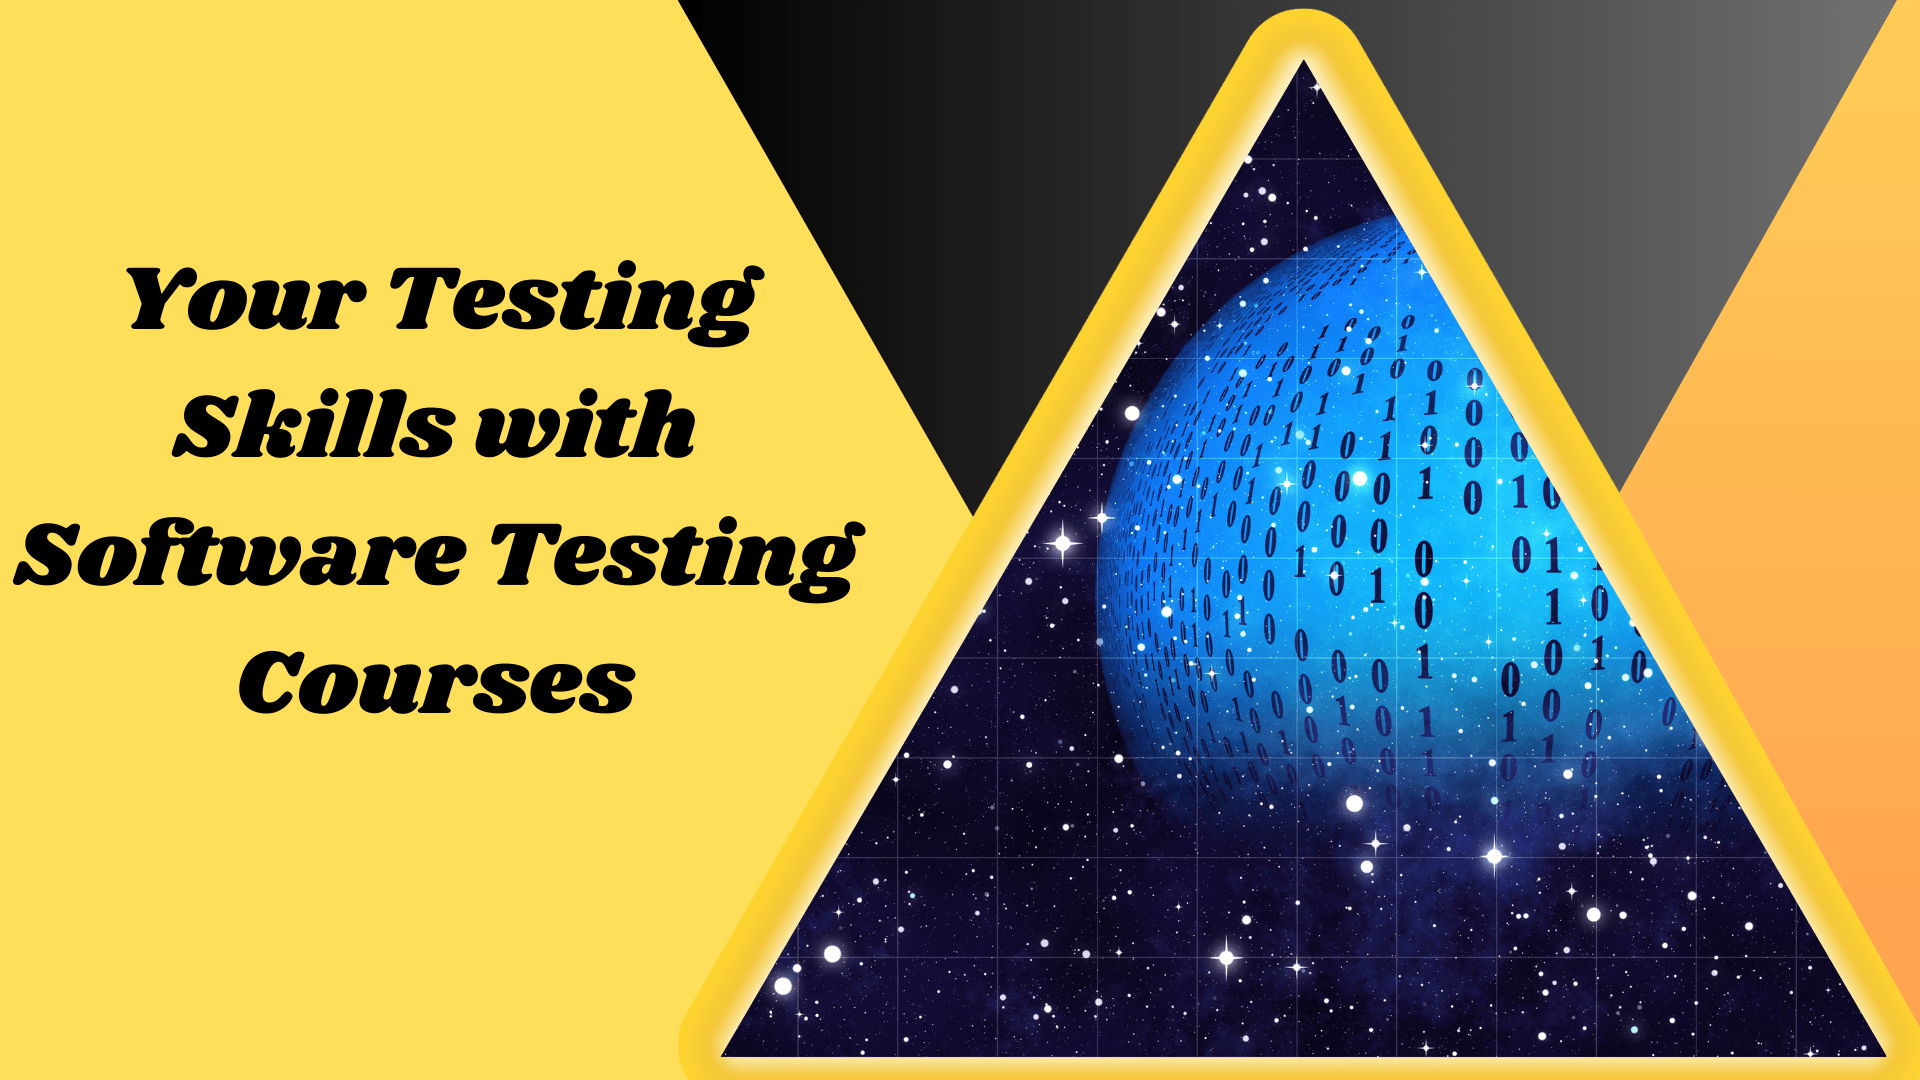 Your Testing Skills with Software Testing Courses